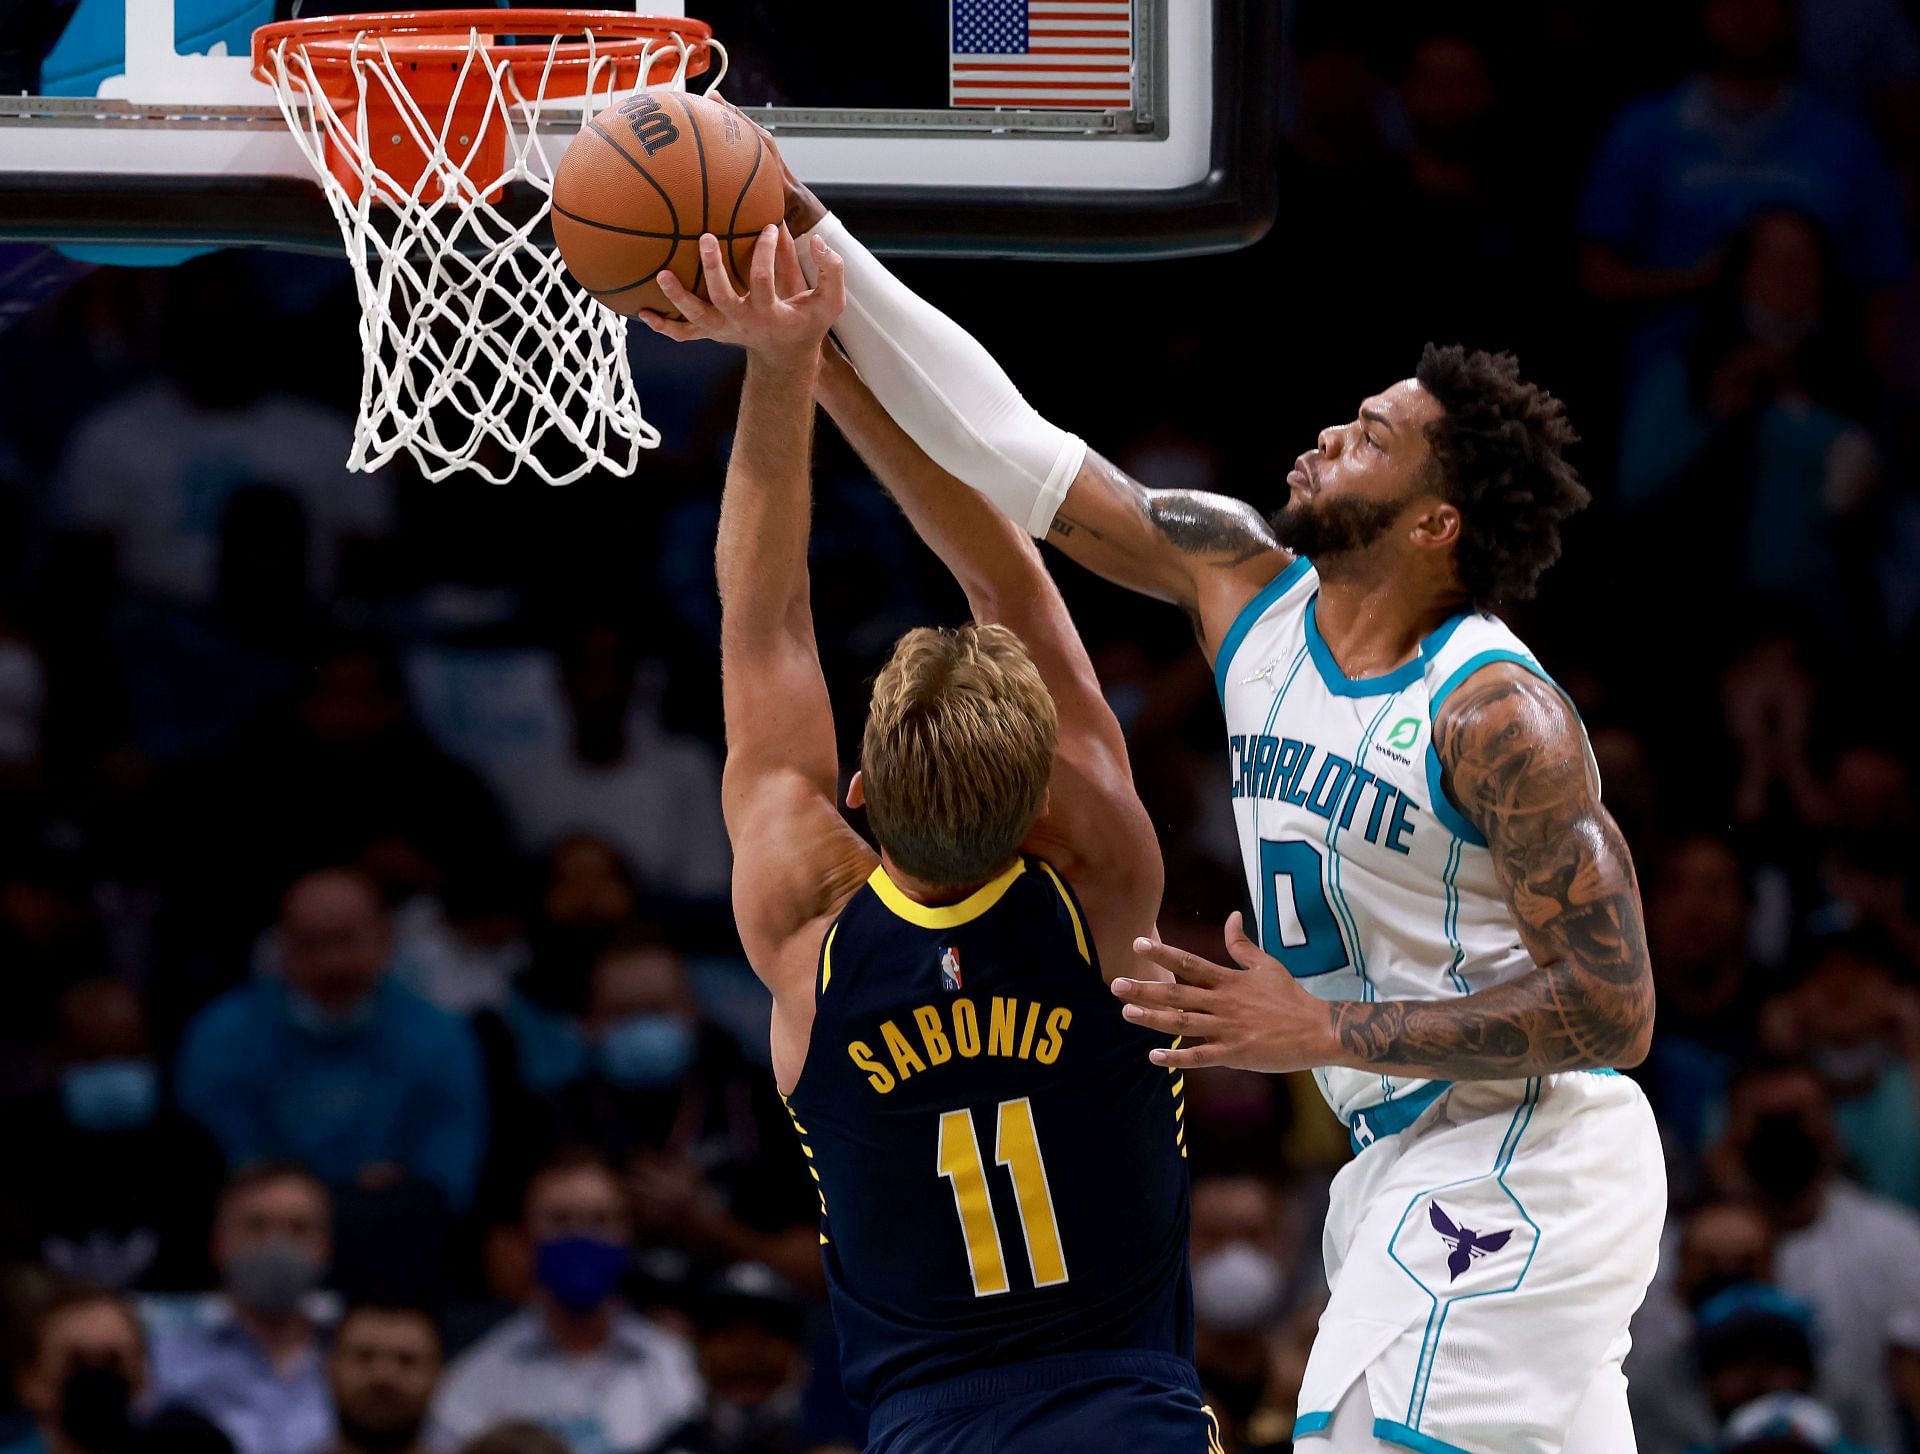 The Indiana Pacers lost their season opener against the Charlotte Hornets.